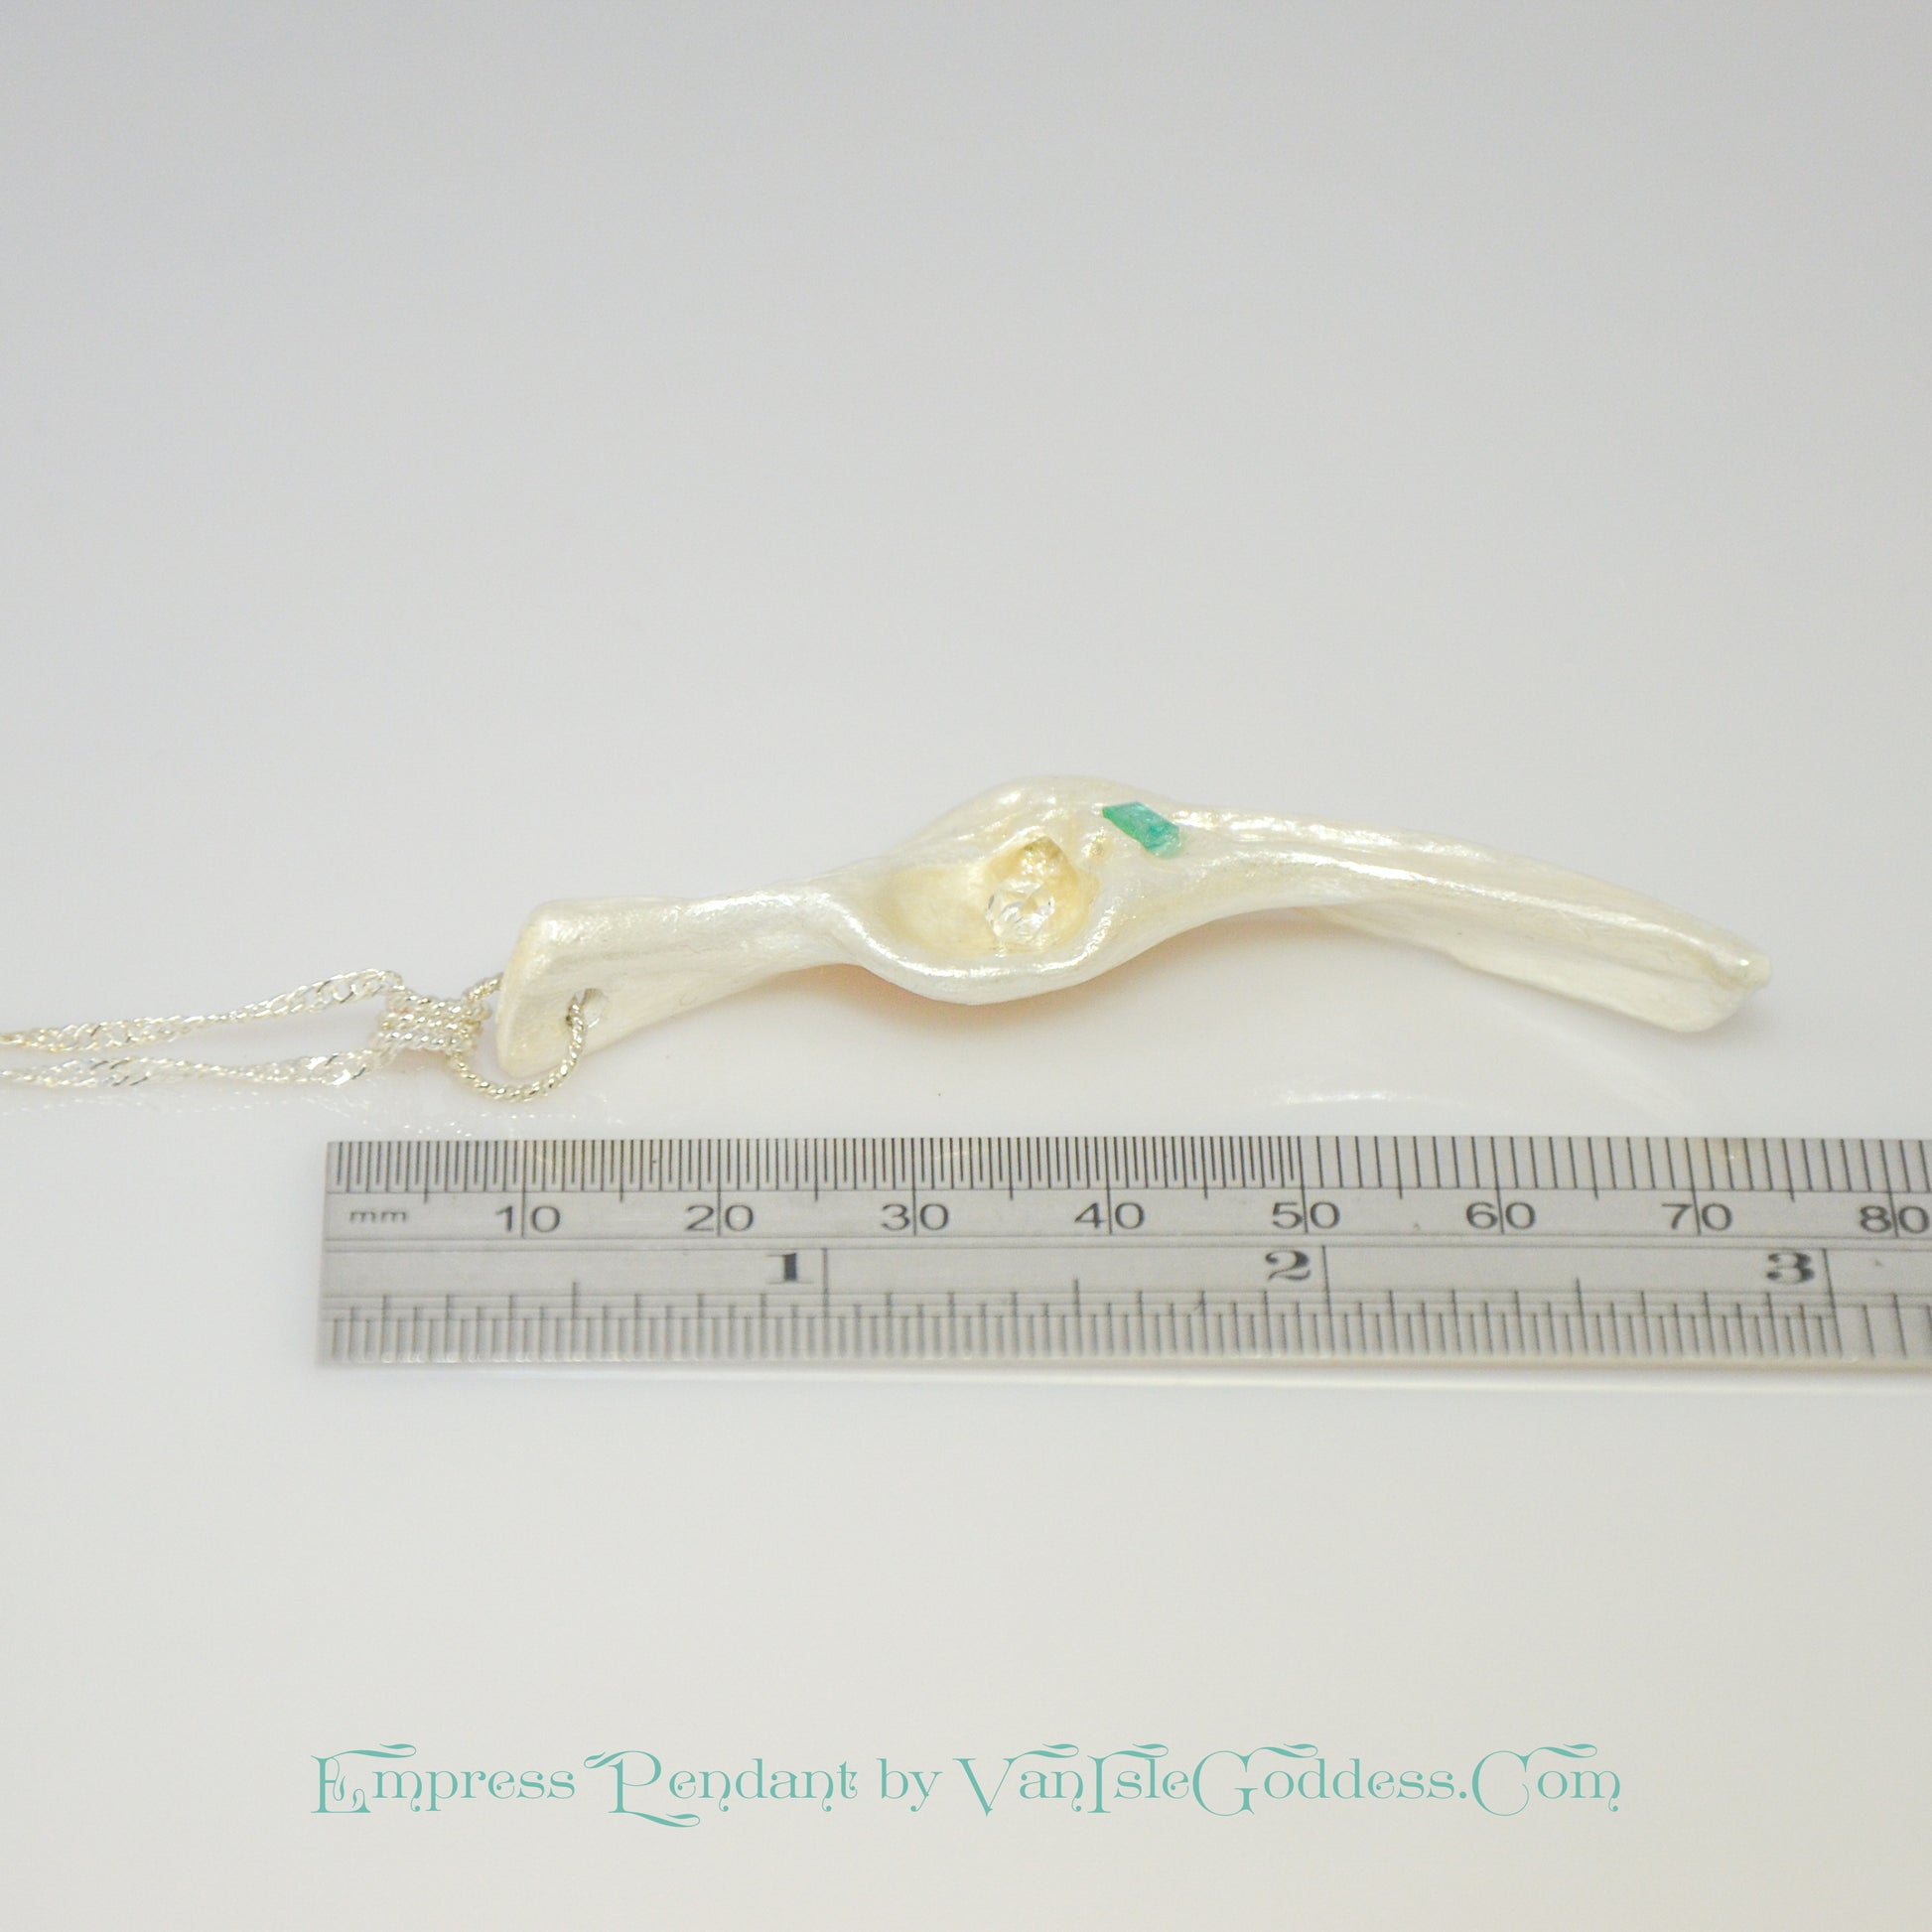 Empress natural seashell pendant with a Herkimer Diamond and Emerald. The pendant is shown laying down along a ruler so the viewer can see how long the pendant is.